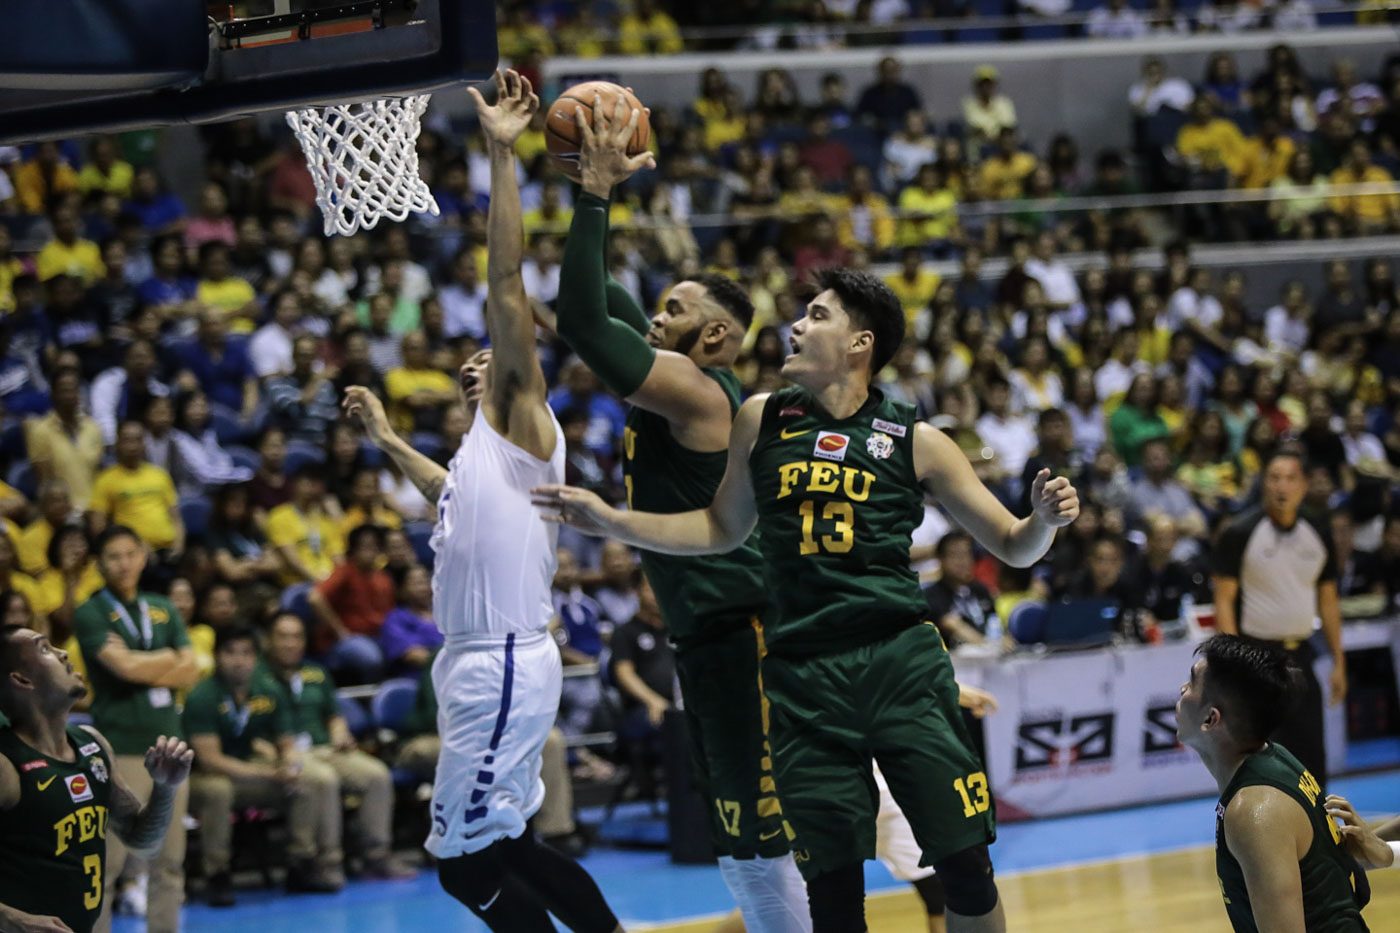 Former Eagles Racela, Tolentino and Cani come up big in FEU’s surprise drubbing of Ateneo